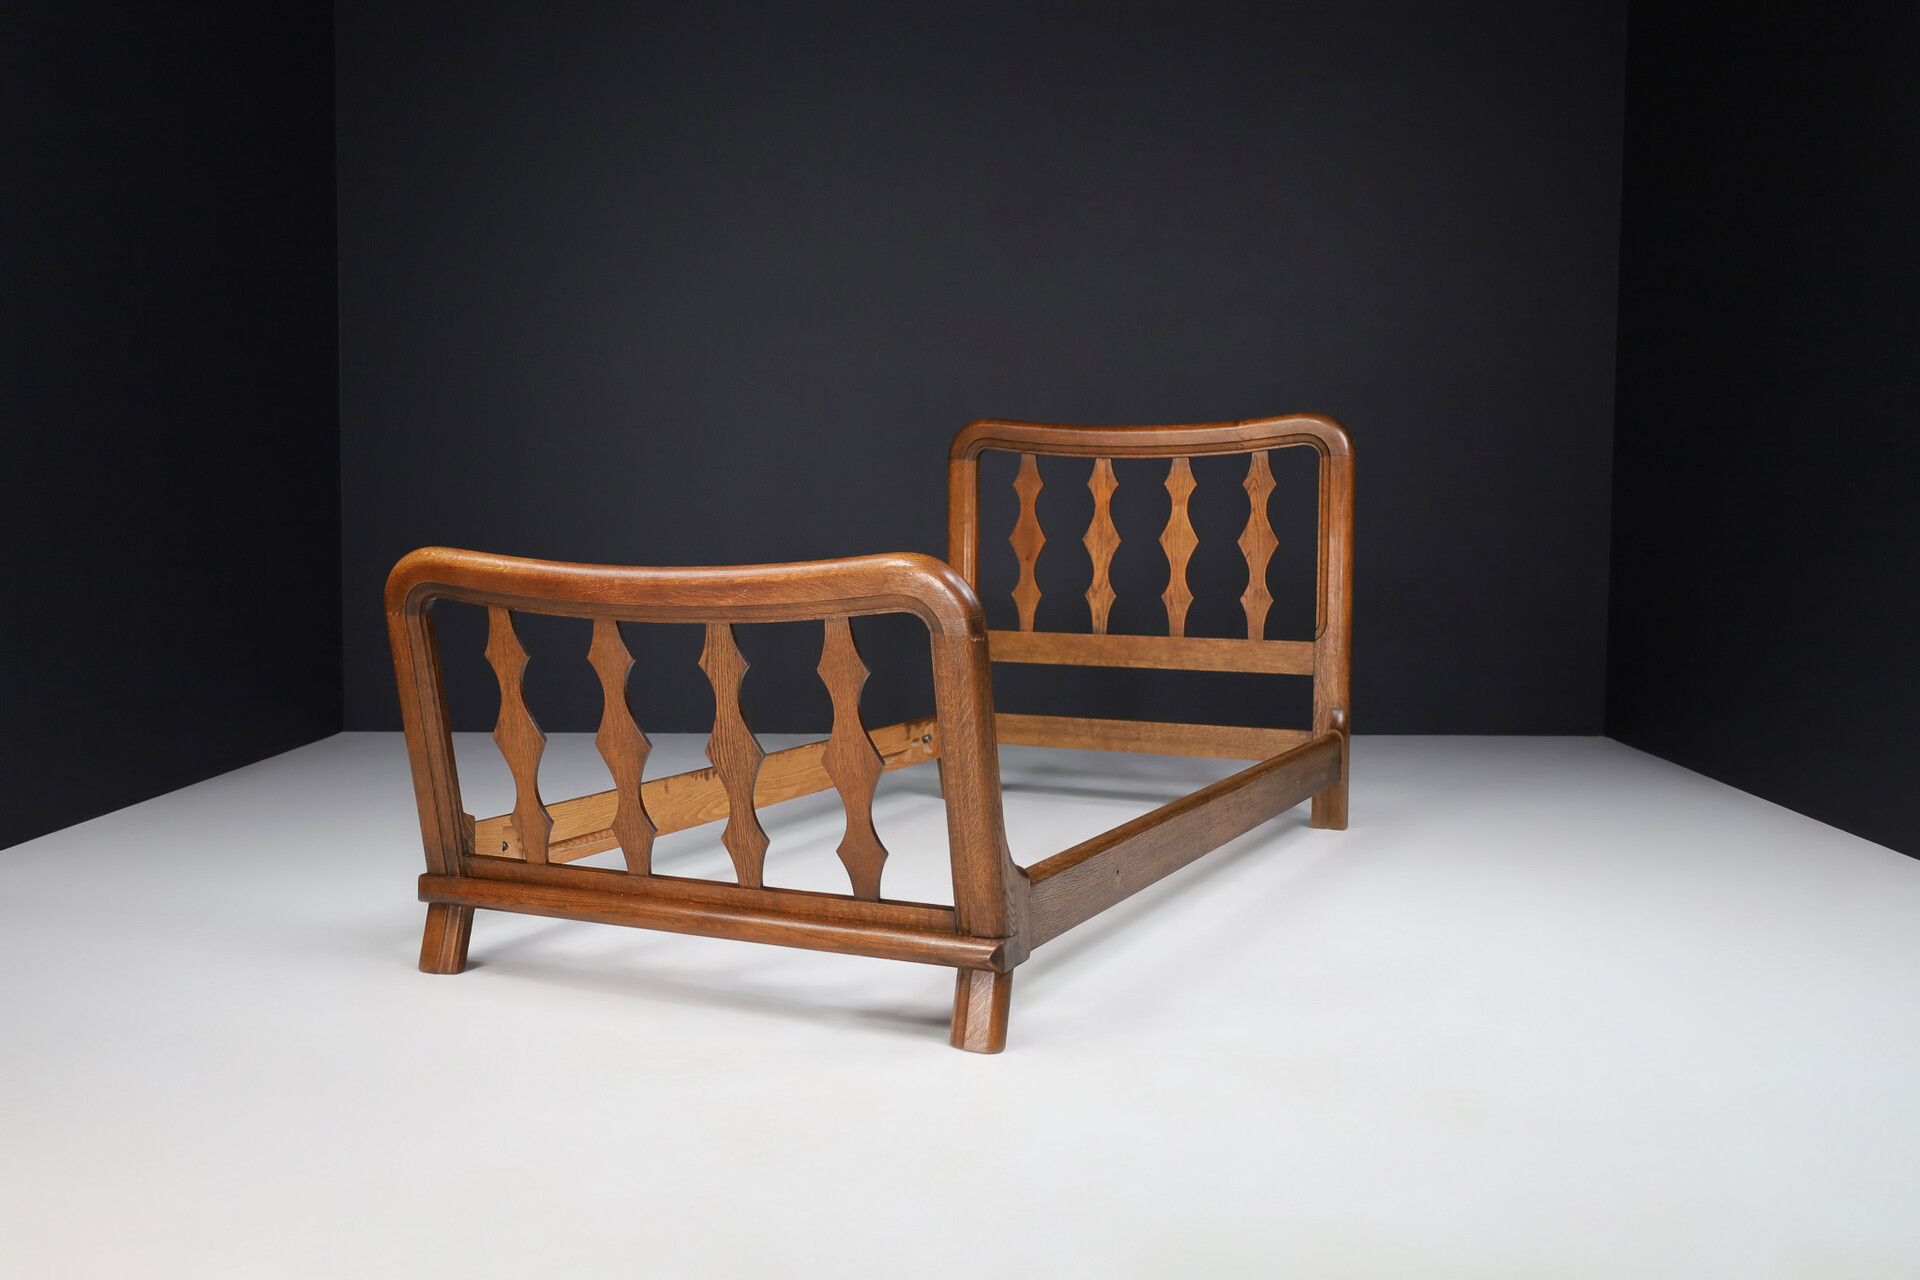 Mid century modern Guillerme & Chambron  Bed in Solid Oak , France 1960s Mid-20th century